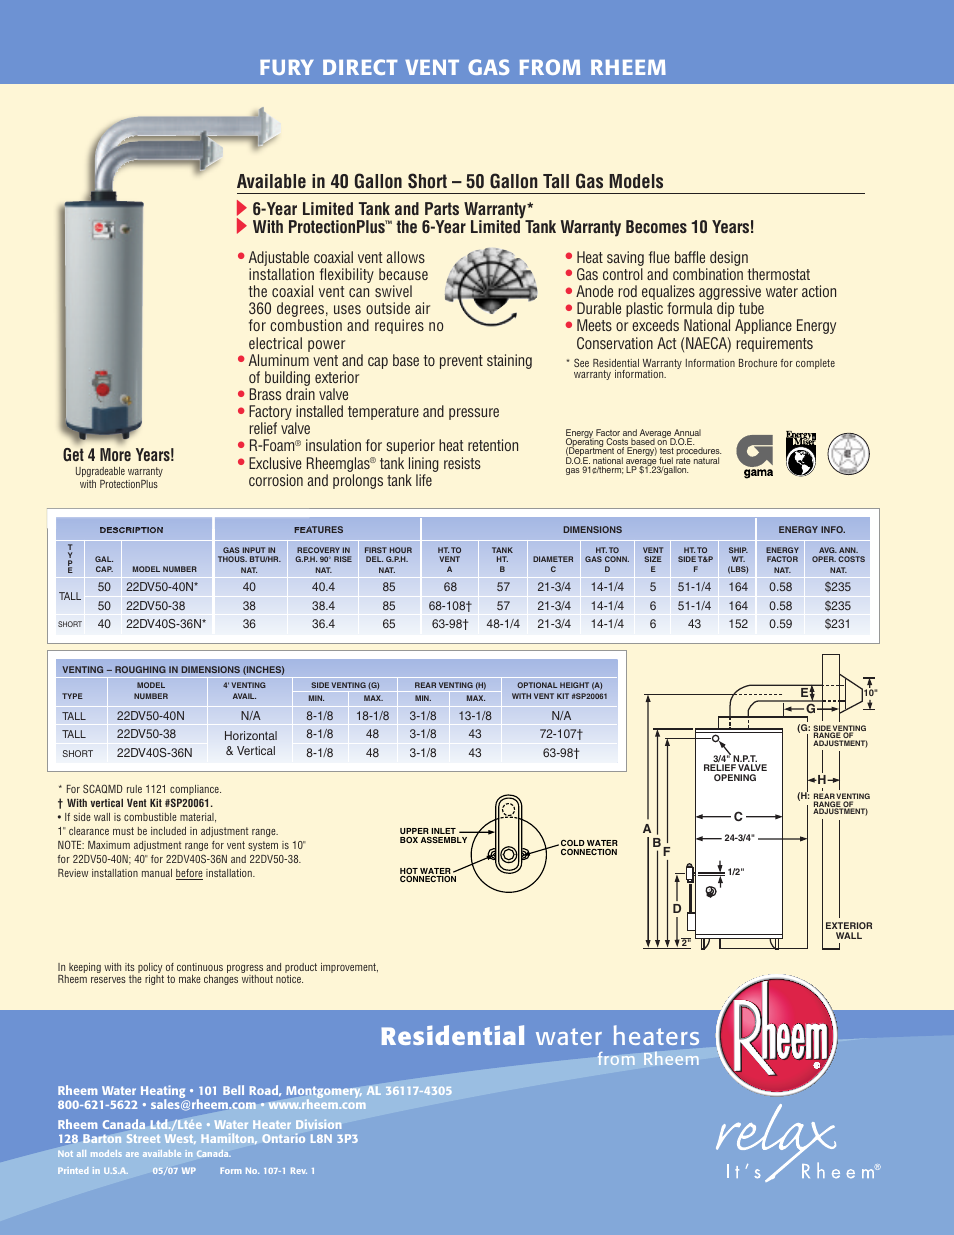 Residential water heaters, Fury direct vent gas from rheem, Get 4 more